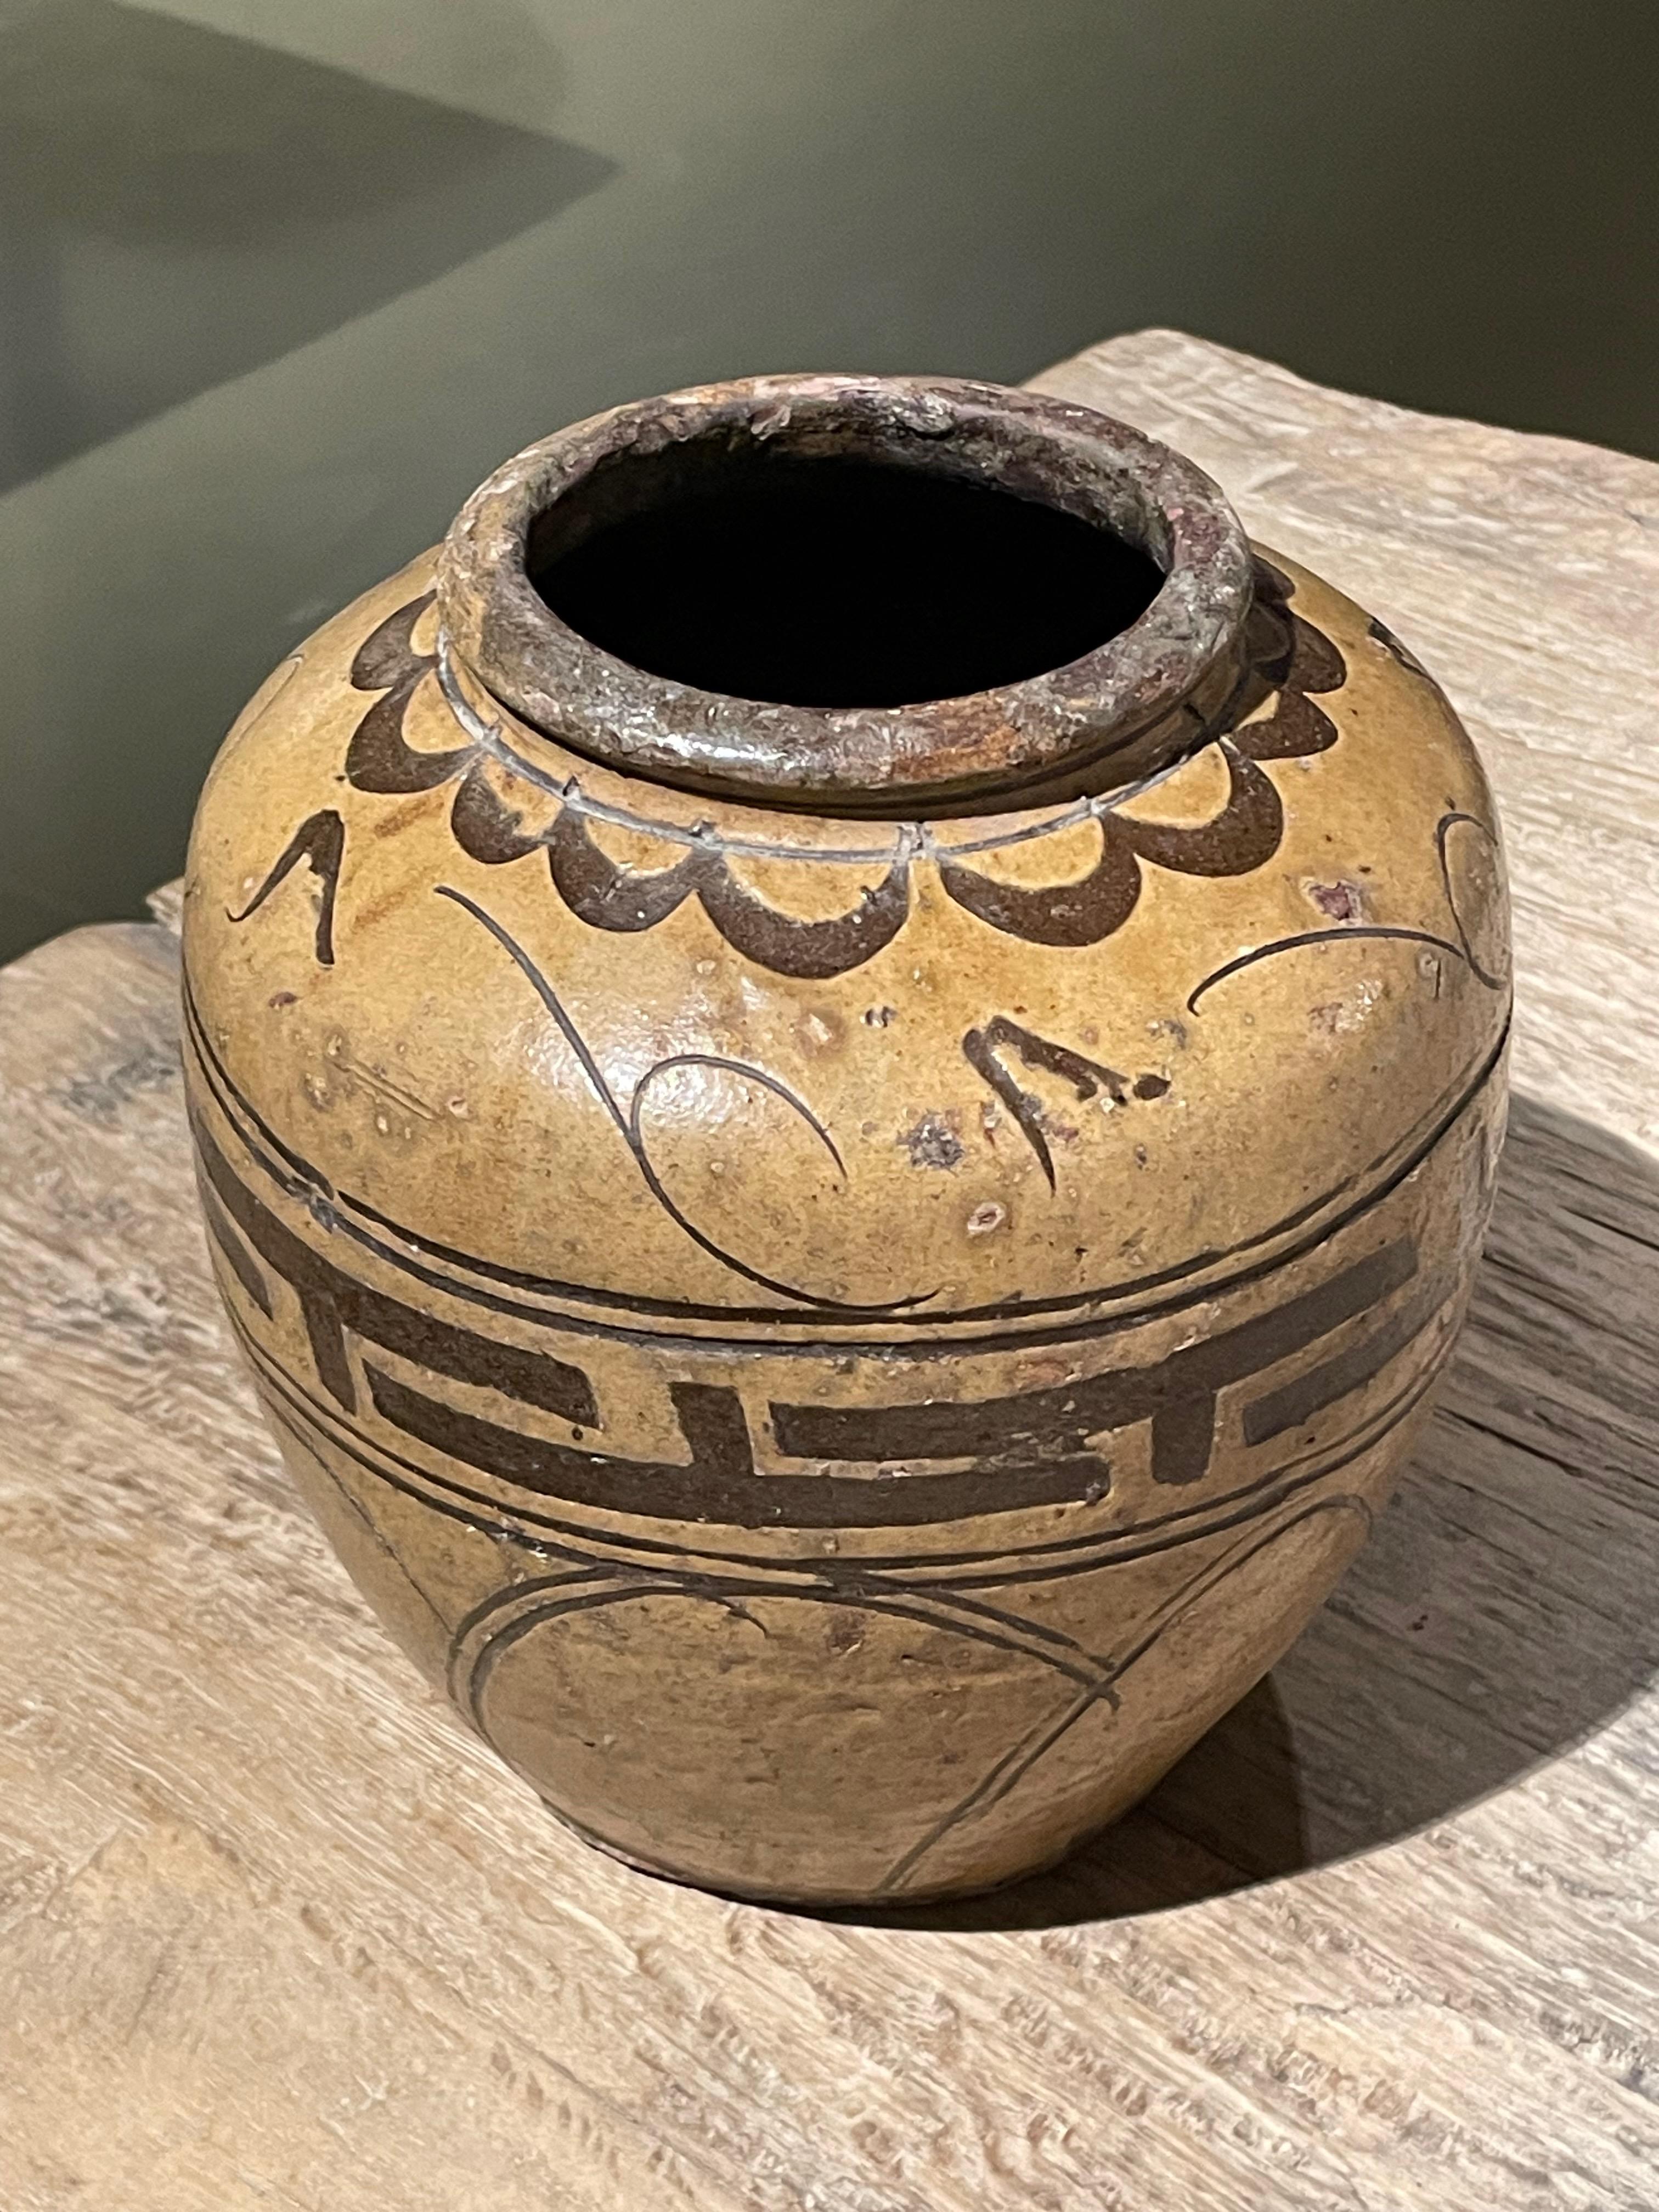 19th century Chinese gold glaze classic shape vase.
Decorative geometric design.
Natural weathered patina and wear.
Part of a large collection.
ARRIVING APRIL